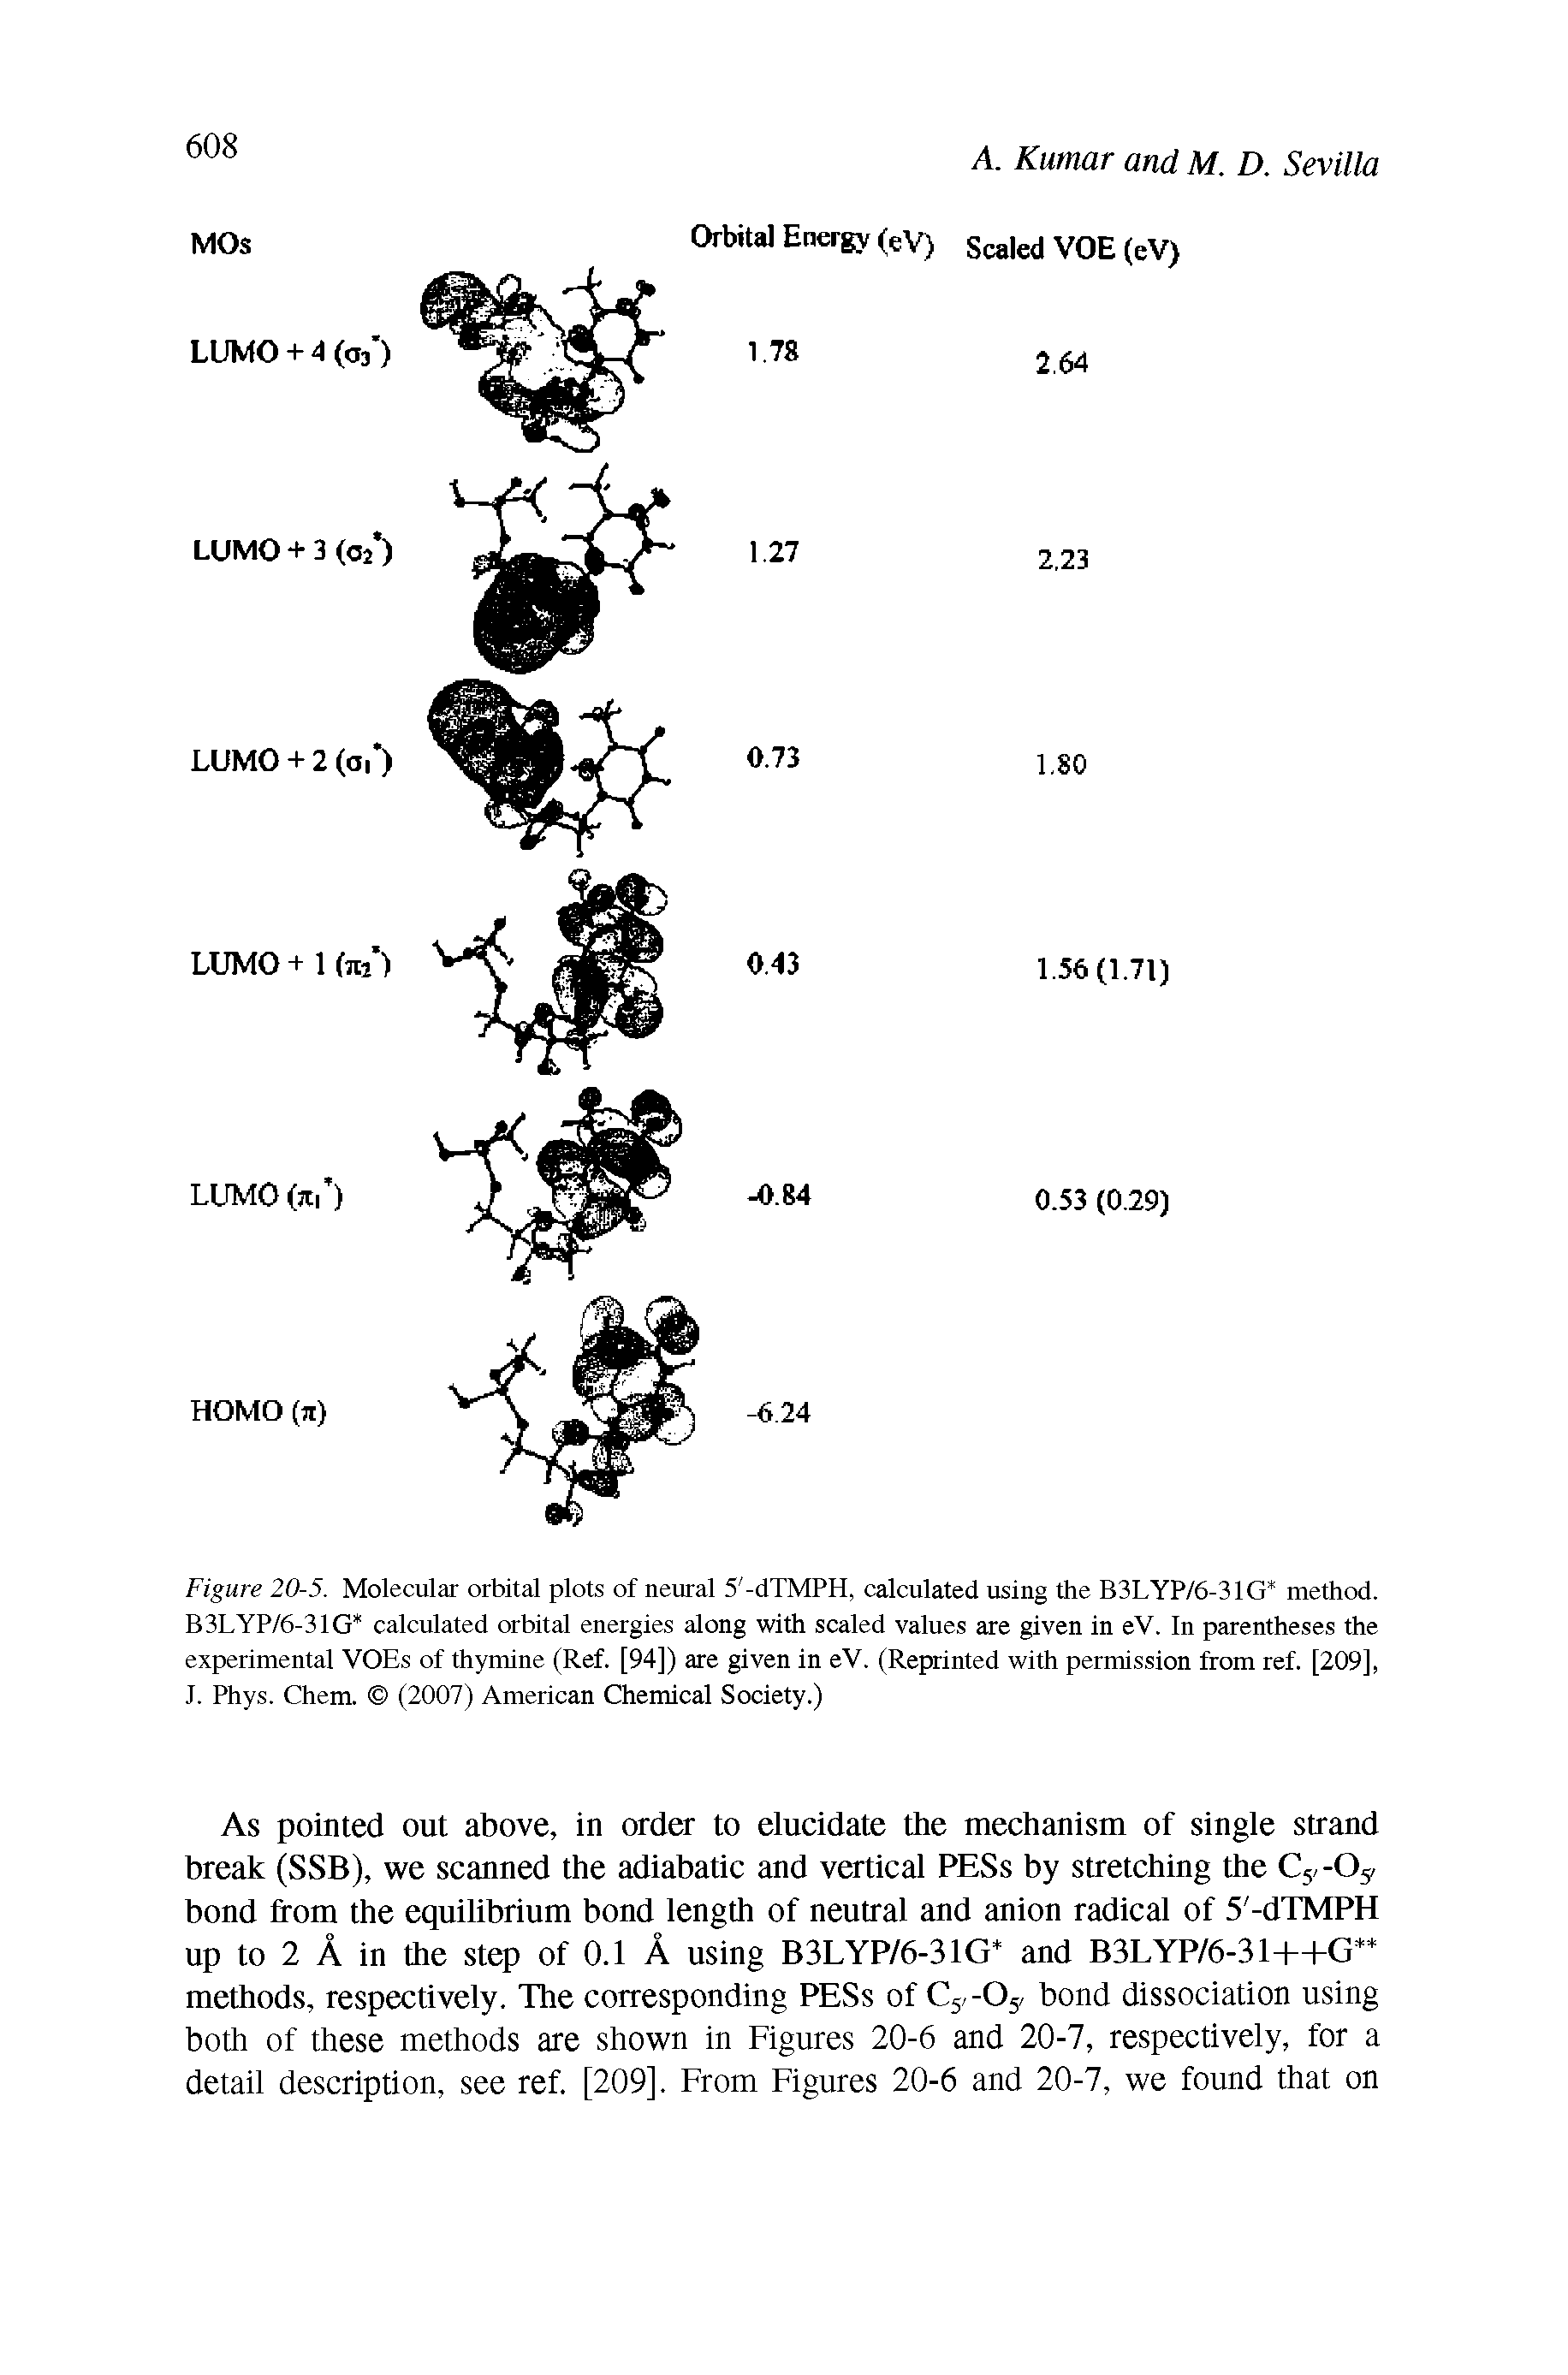 Figure 20-5. Molecular orbital plots of neural 5 -dTMPH, calculated using the B3LYP/6-31G method. B3LYP/6-31G calculated orbital energies along with scaled values are given in eV. In parentheses the experimental VOEs of thymine (Ref. [94]) are given in eV. (Reprinted with permission from ref. [209], J. Phys. Chem. (2007) American Chemical Society.)...